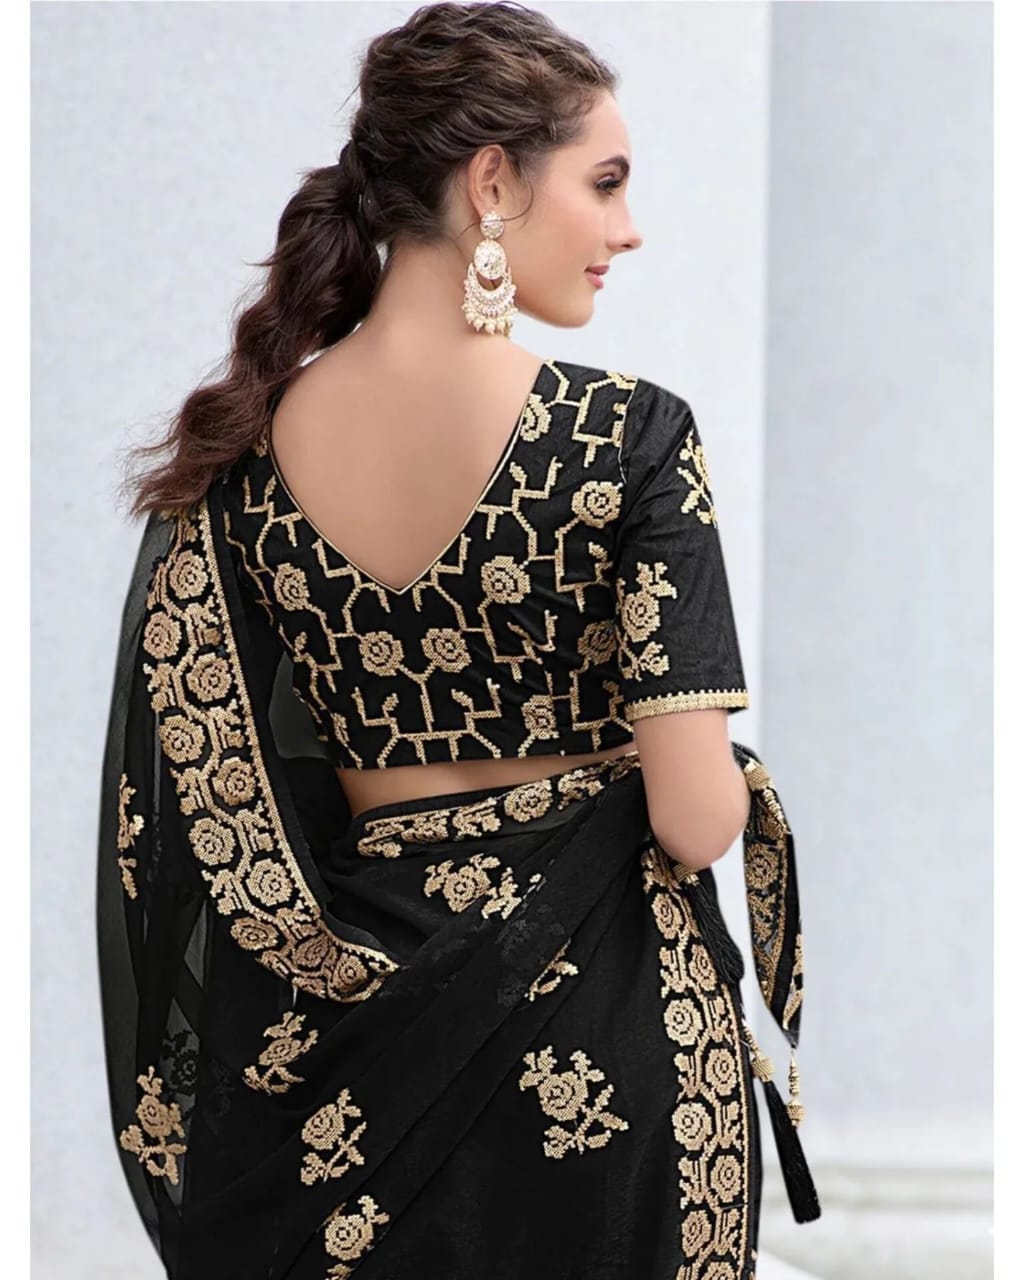 Party Wear Black-3 Saree Anant Tex Exports Private Limited